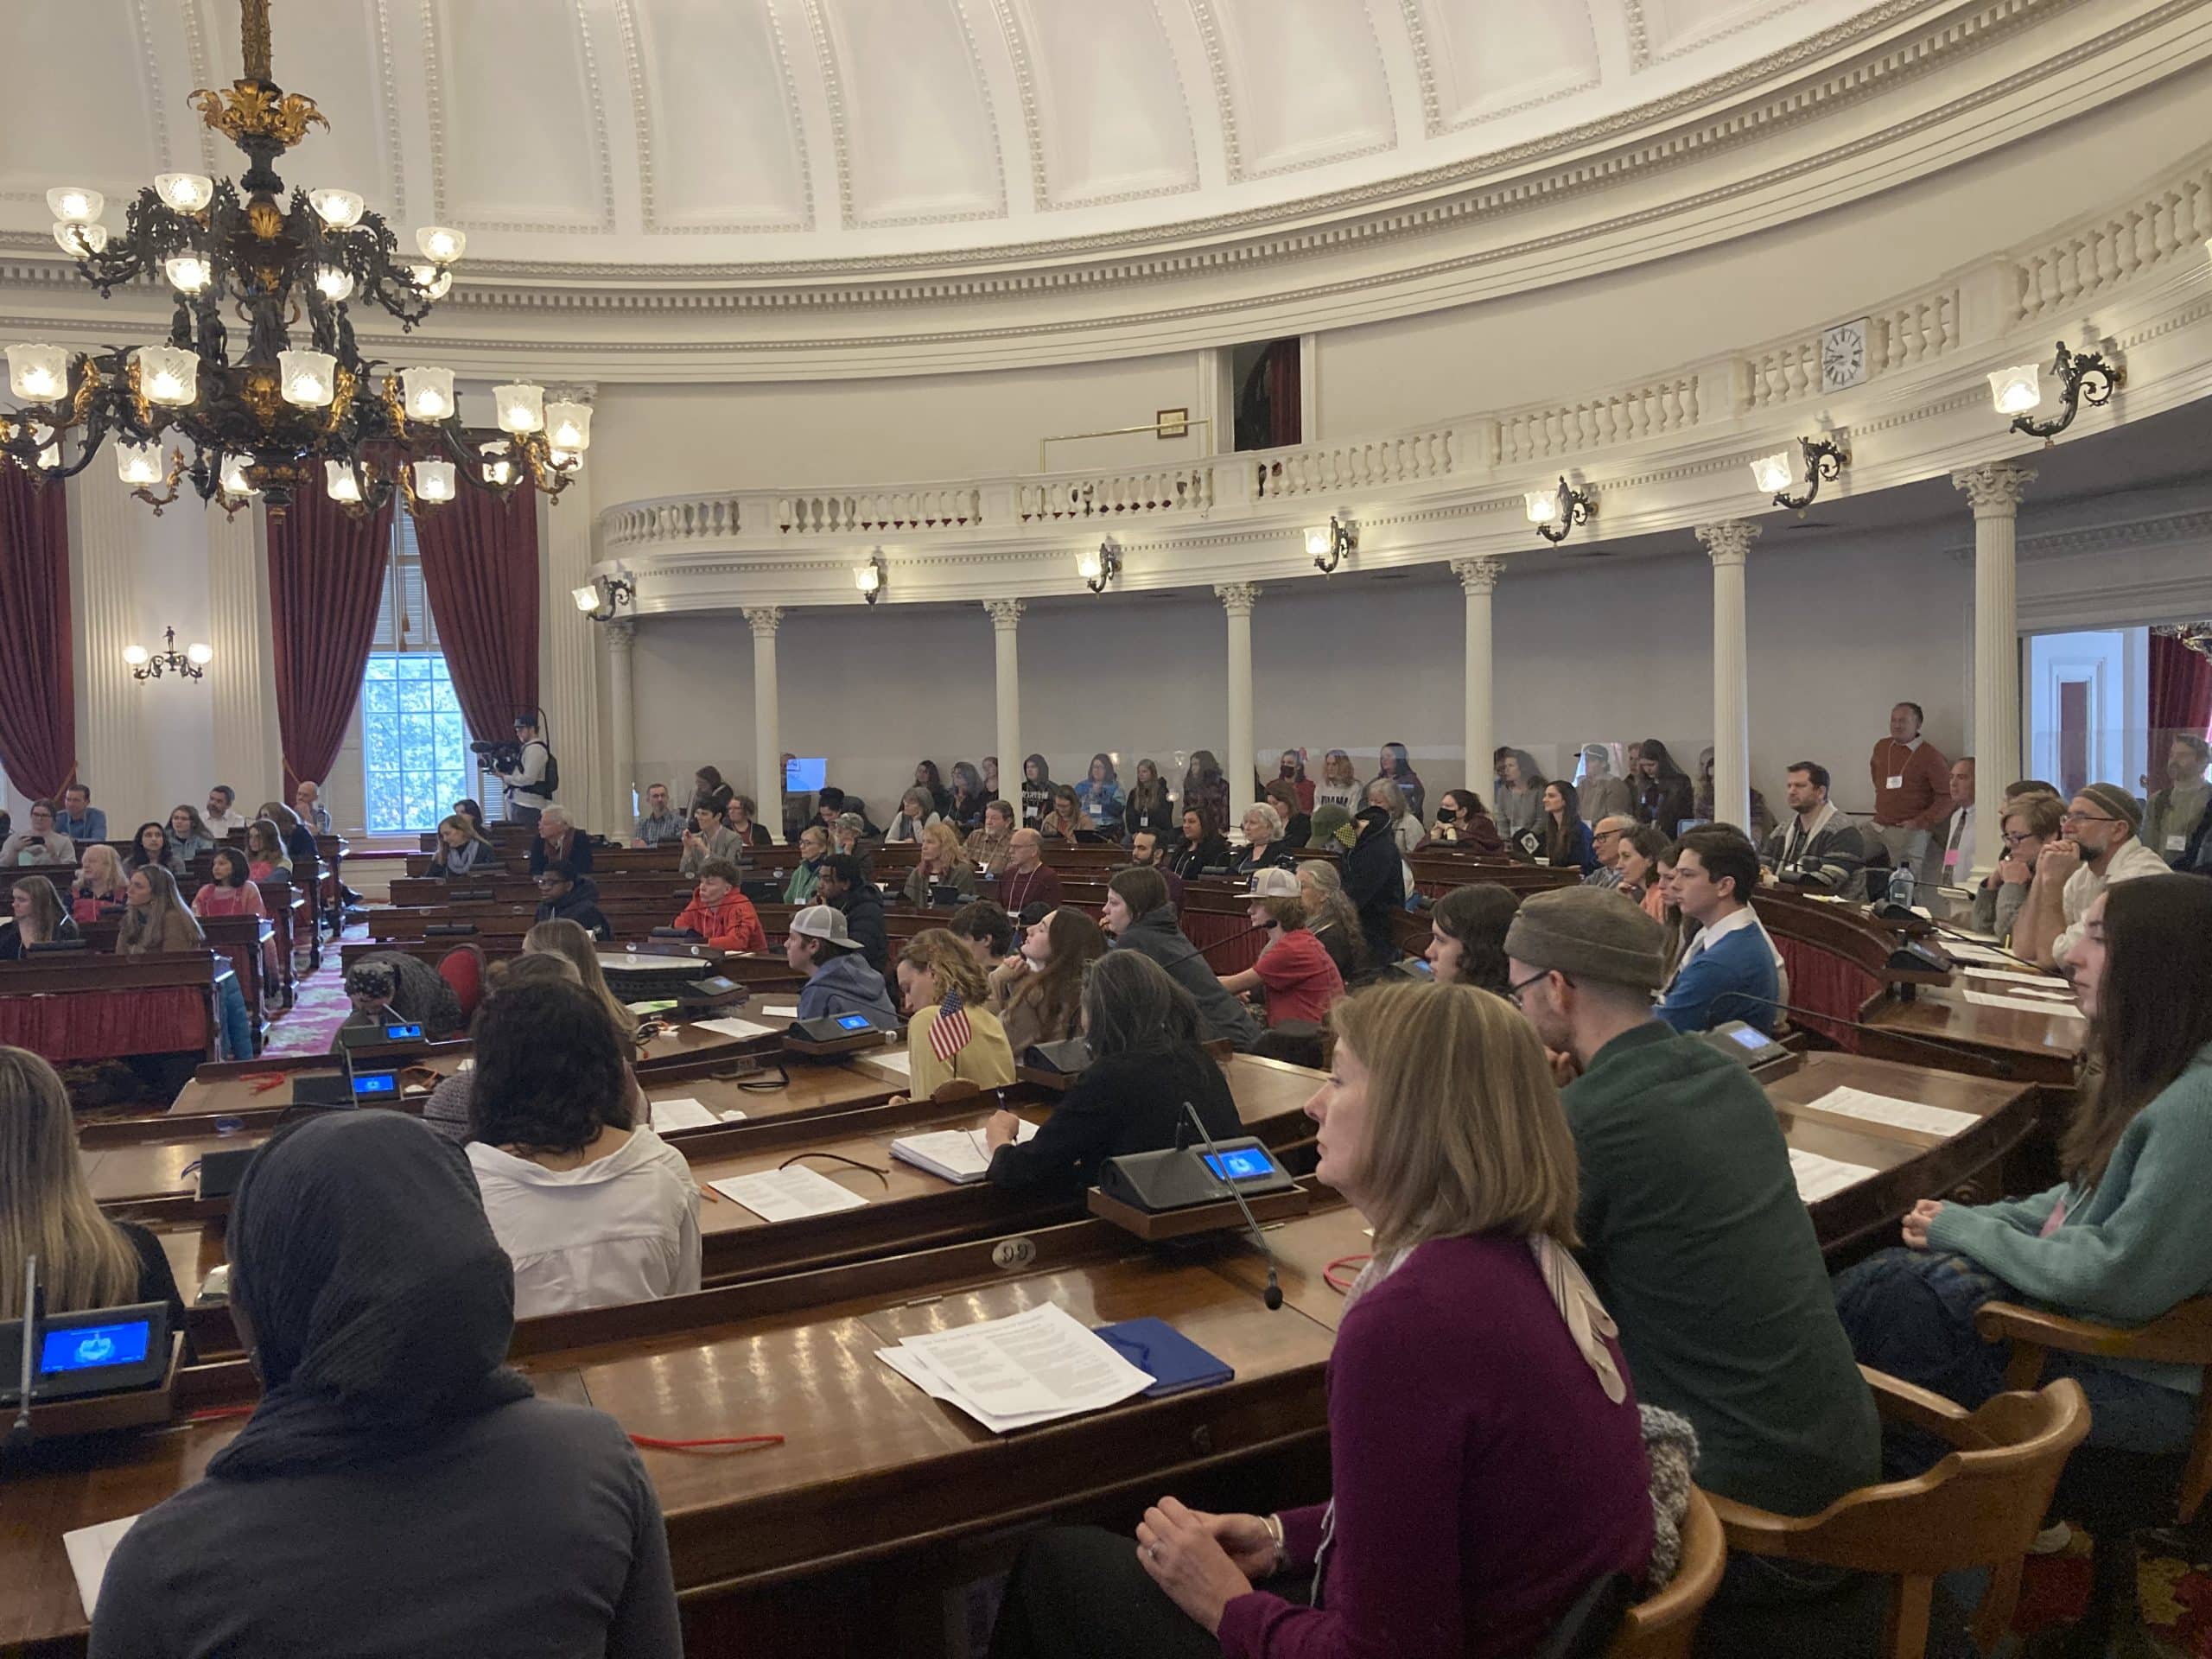 Event participants fill the VT State House Chamber